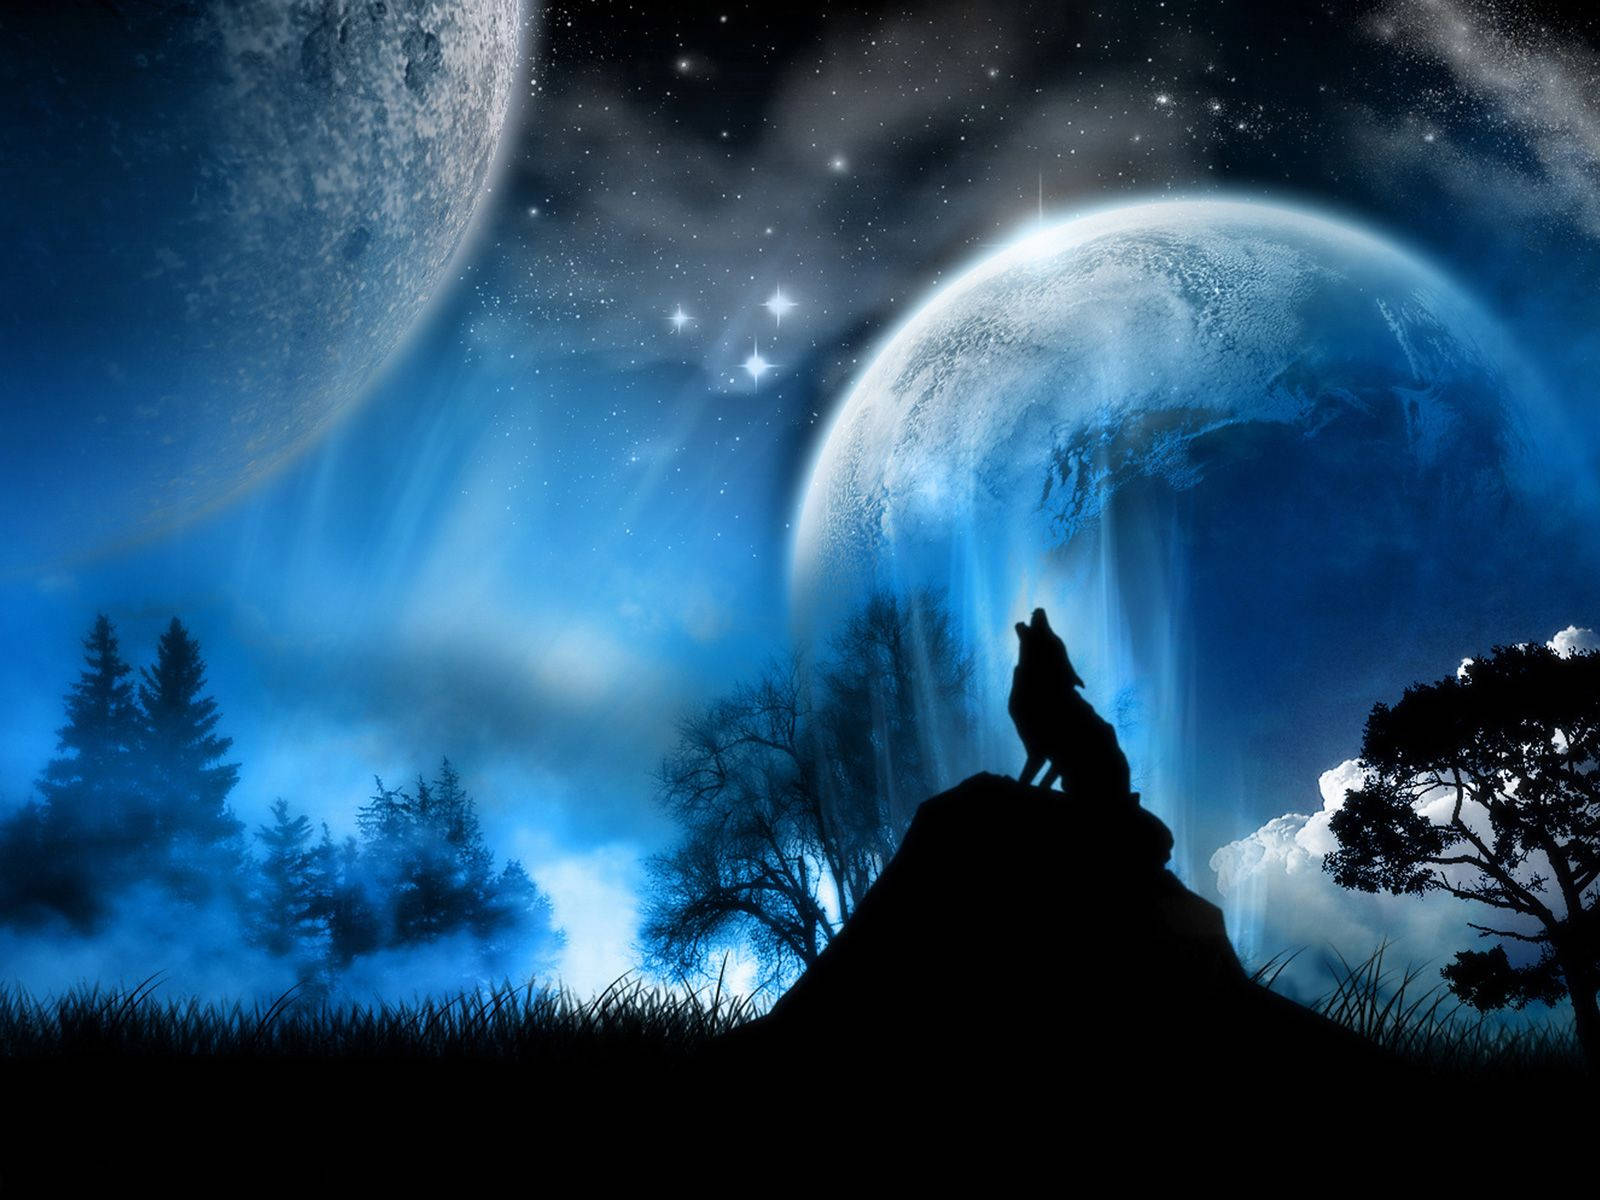 Cool Black Wolf Howling At Magical Sky Wallpaper